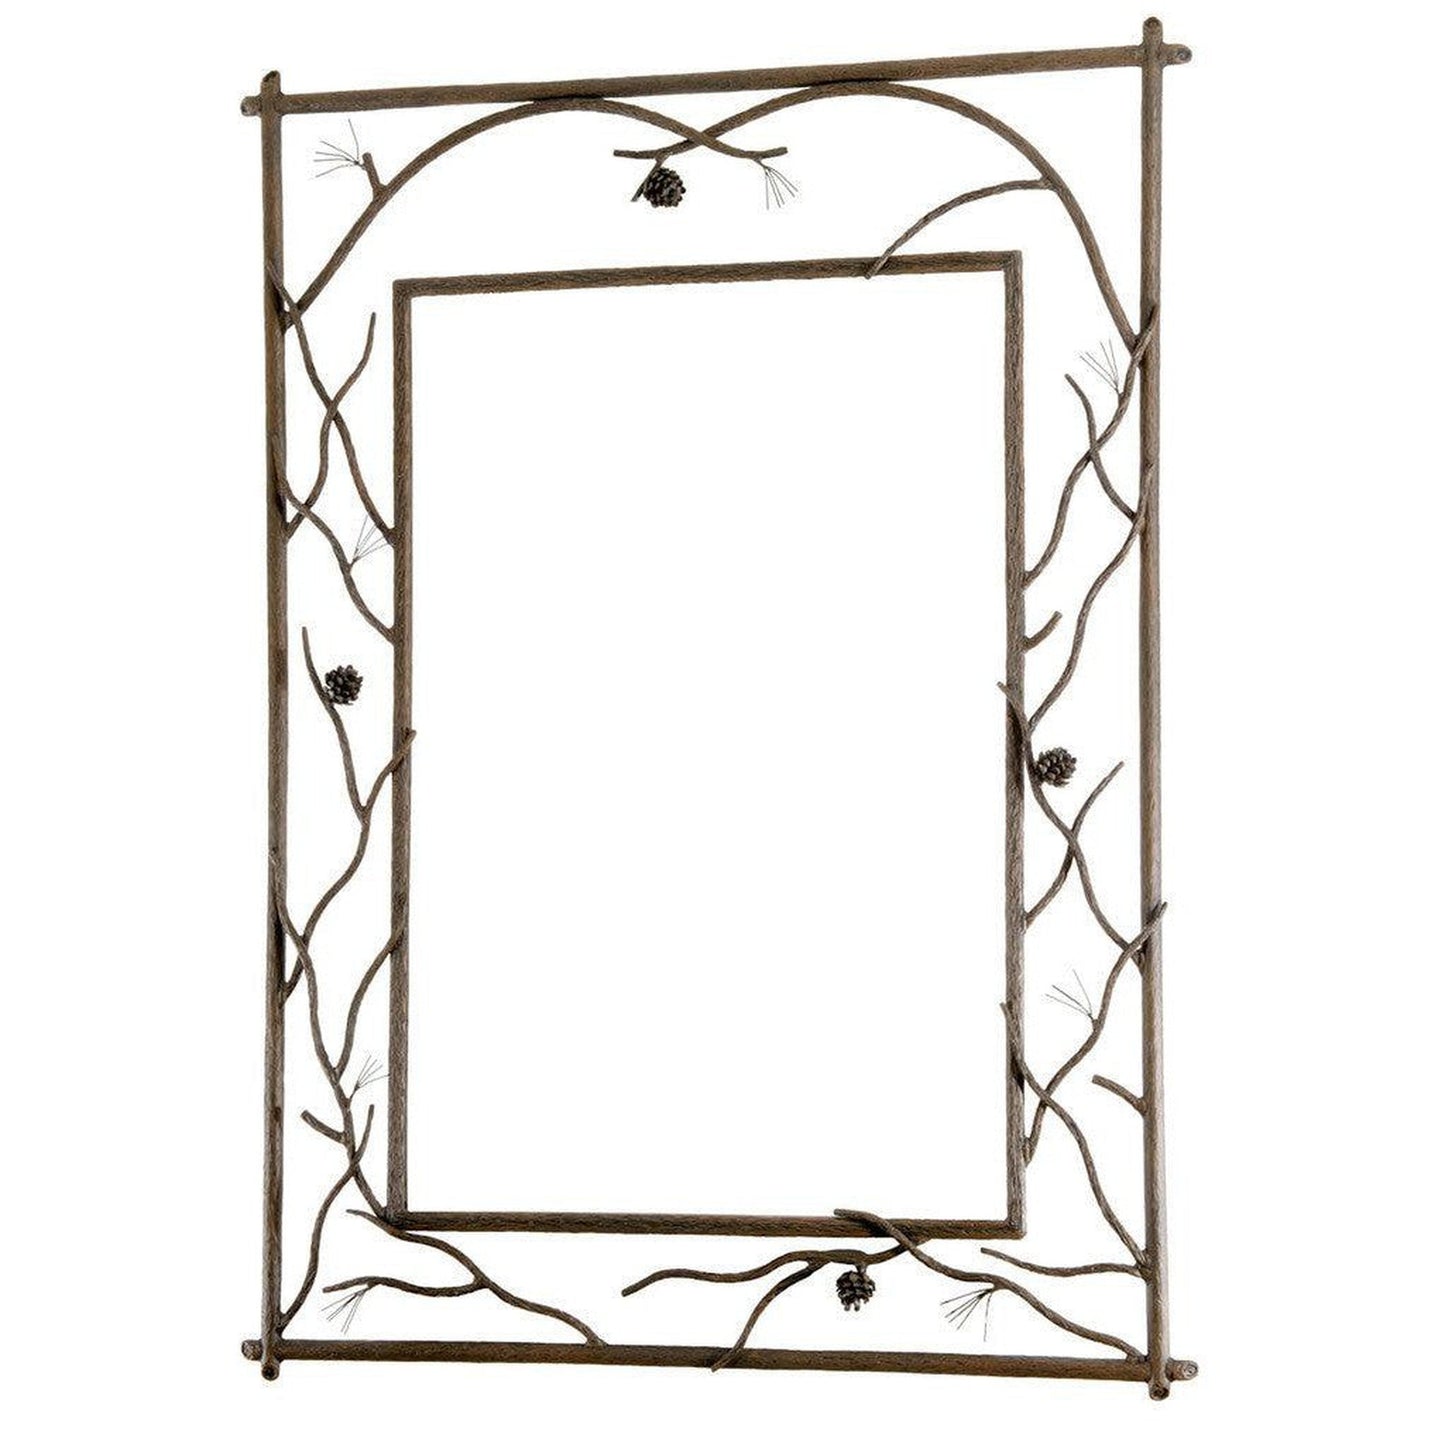 Stone County Ironworks Pine 37" x 51" Large Woodland Brown Branched Iron Wall Mirror With Gold Iron Accent